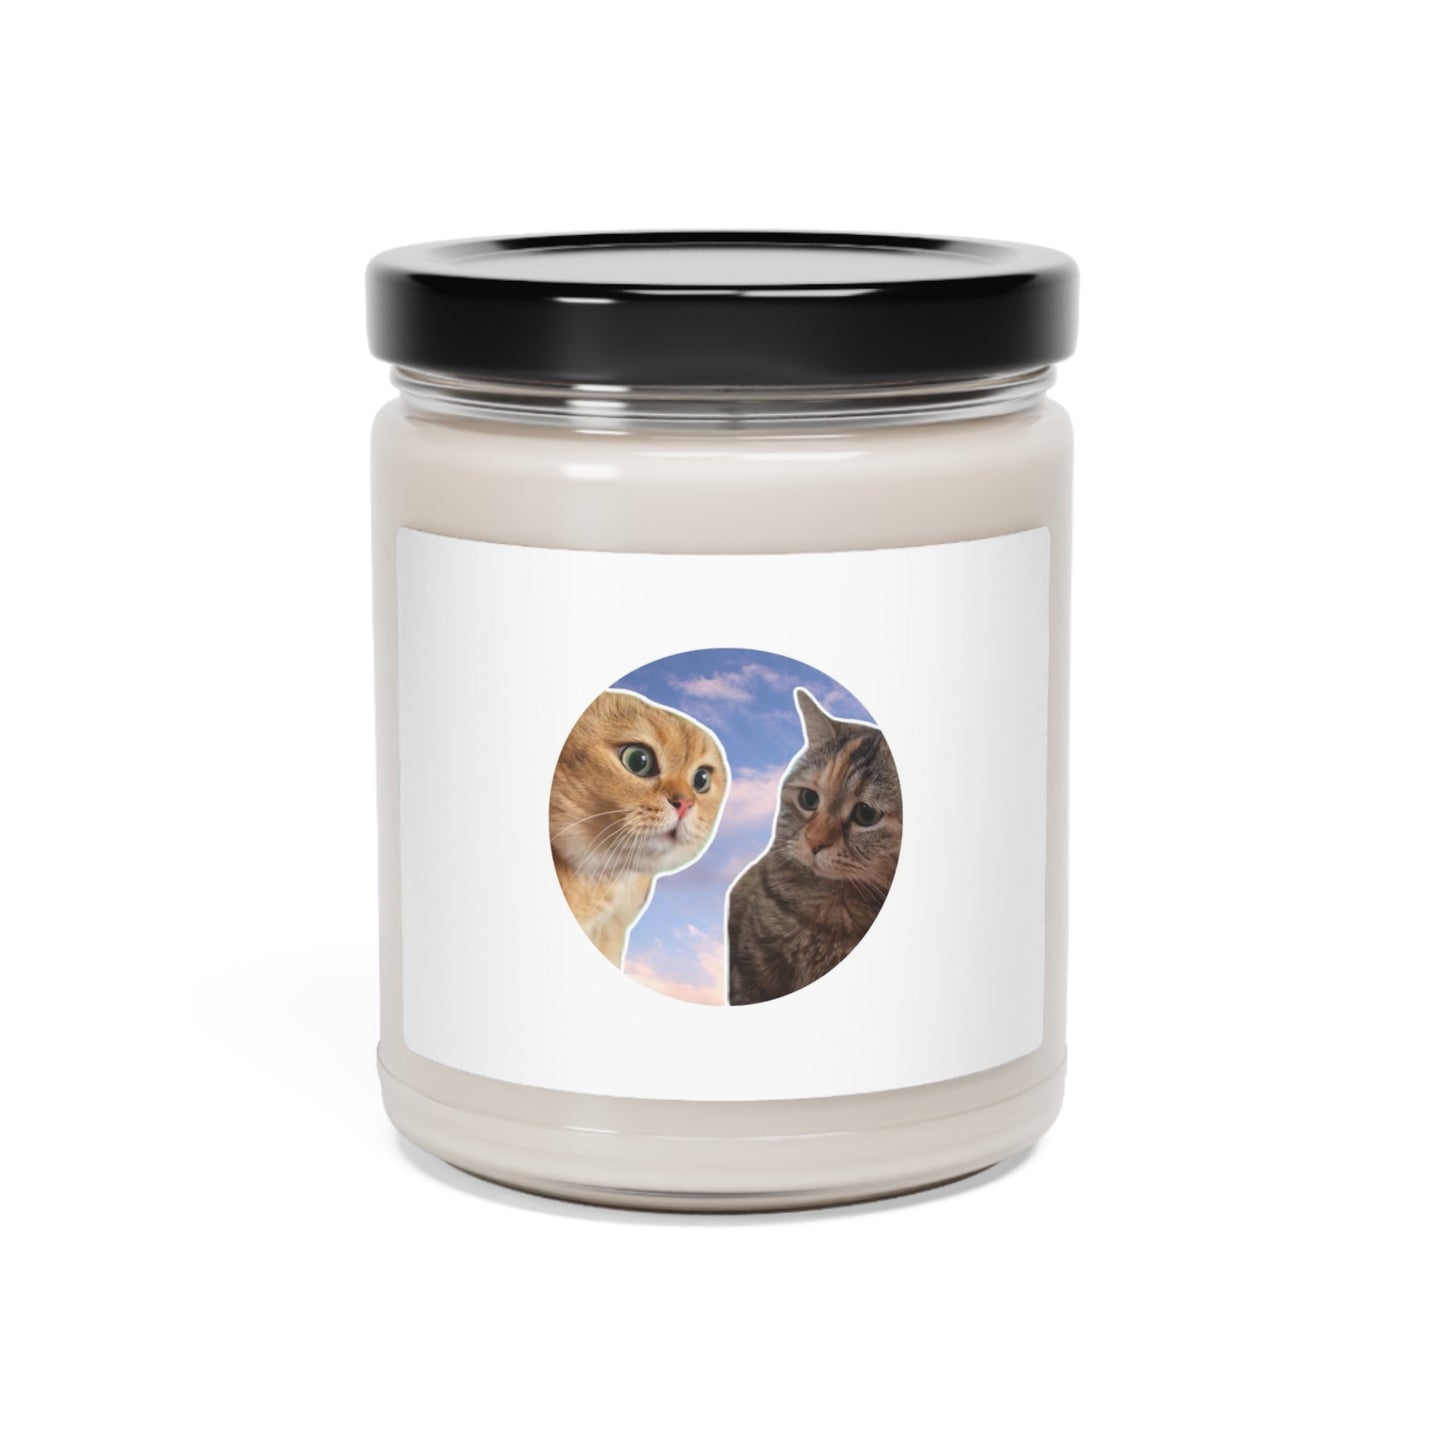 Talking Cats Meme Scented Soy Candle, 9oz - getallfun